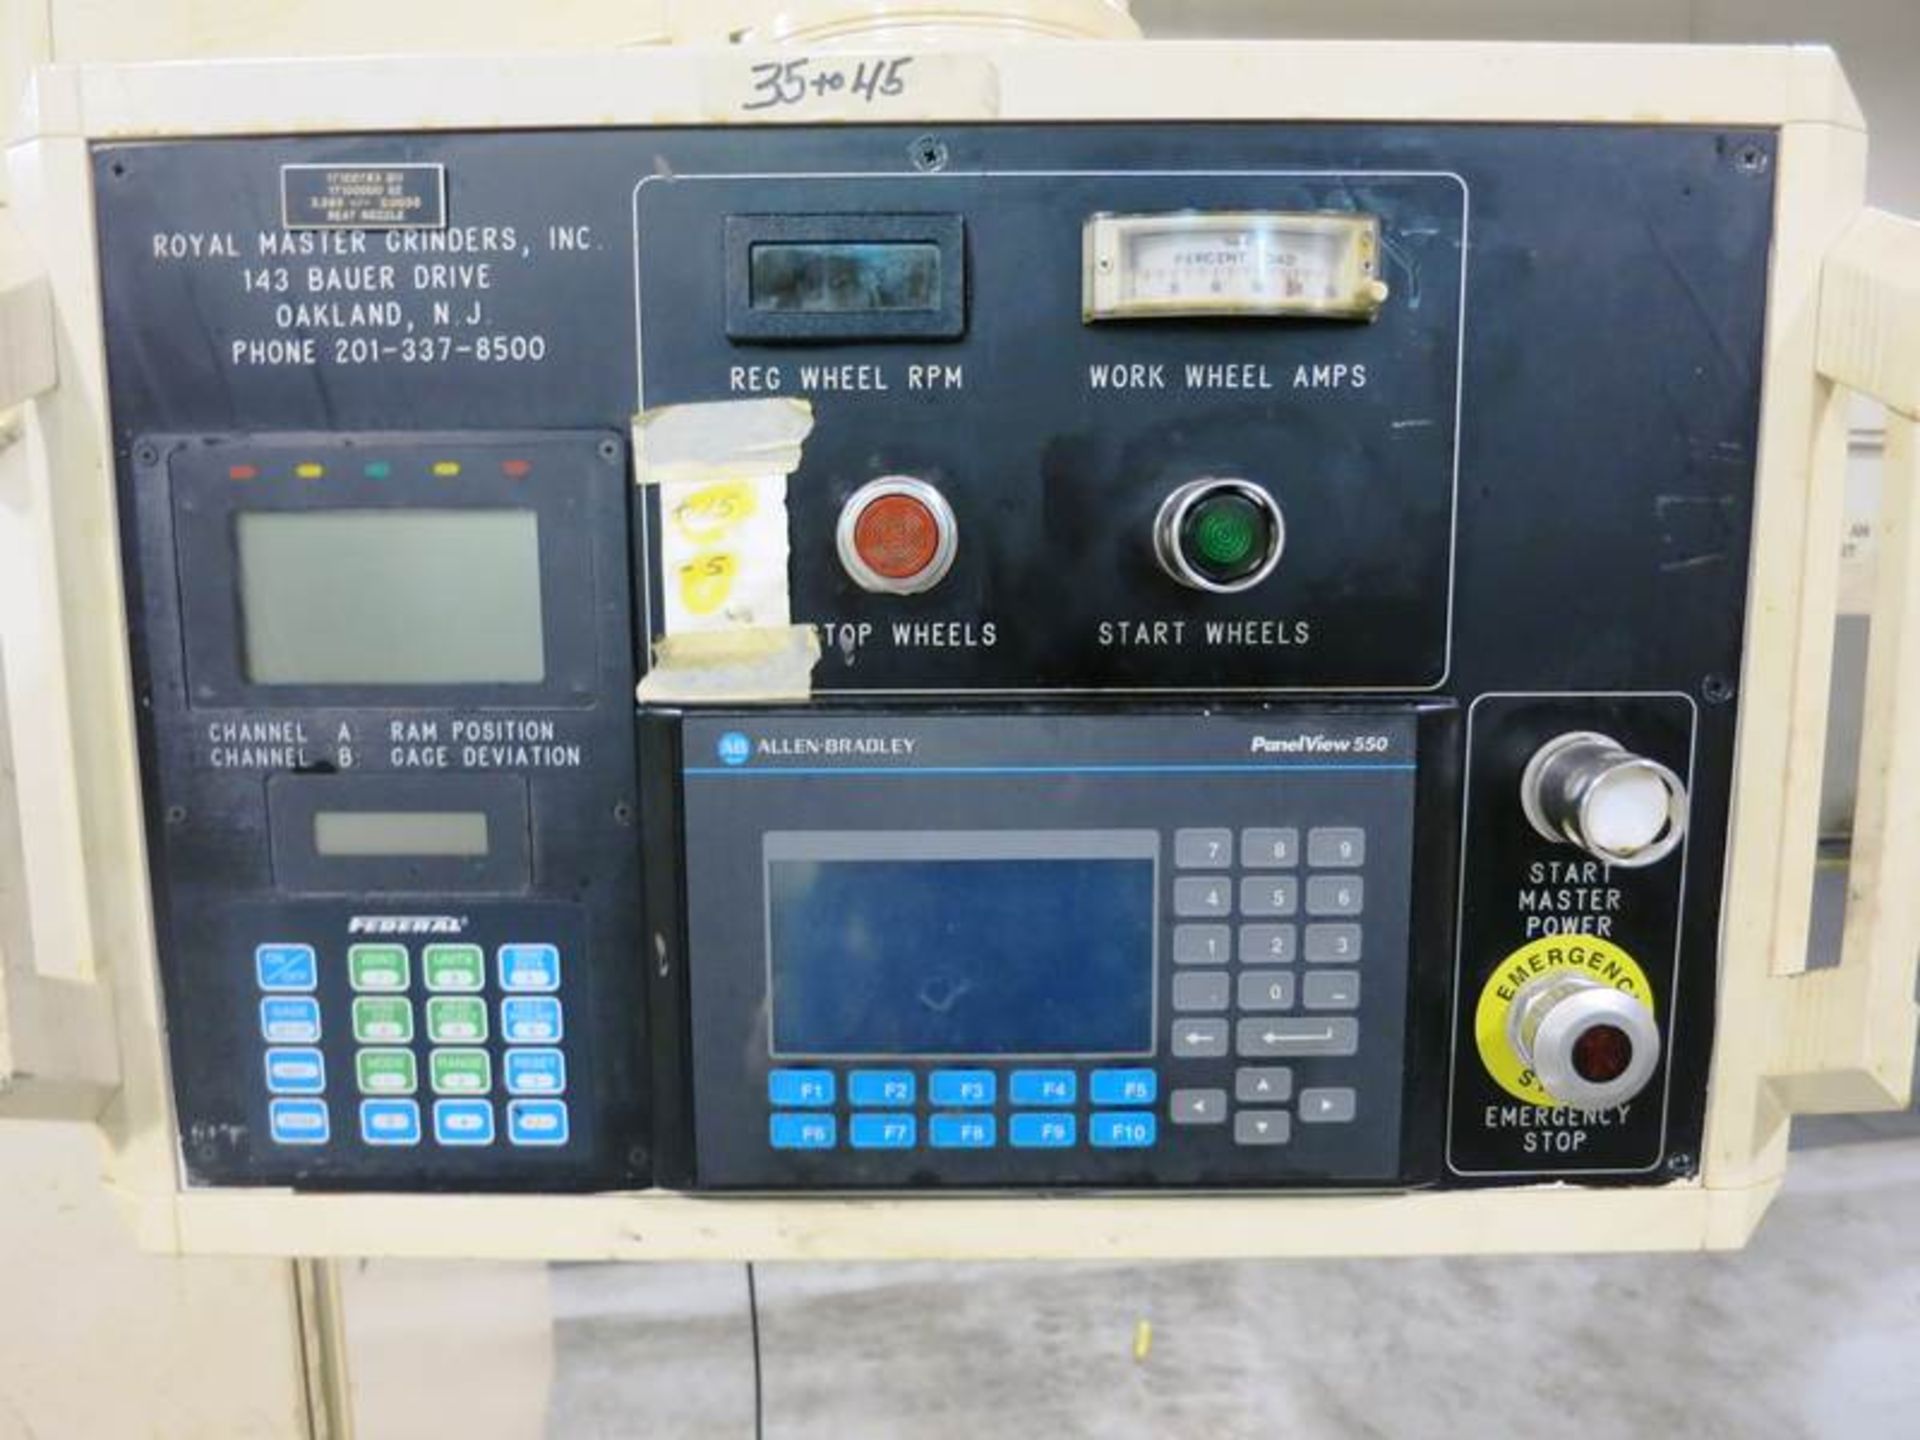 ROYAL MASTER TG-12X4 "HIGH ACCURACY" CENTERLESS GRINDER, S/N 2095, NEW 1996 - Image 2 of 8